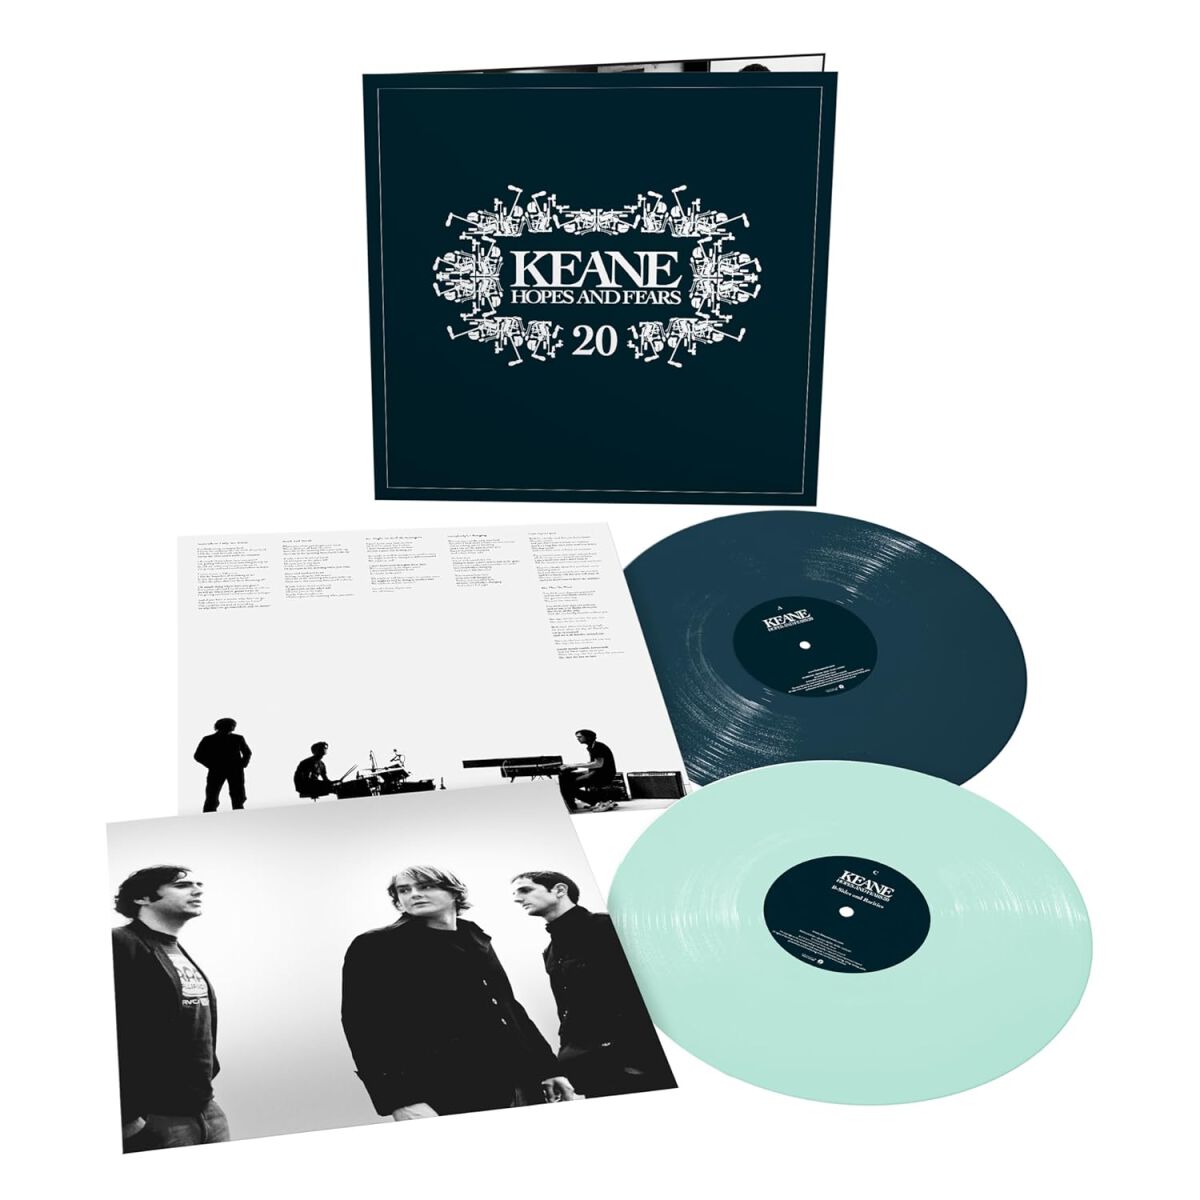 Levně Keane Hopes and fears (20th Anniversary Edition) 2-LP standard